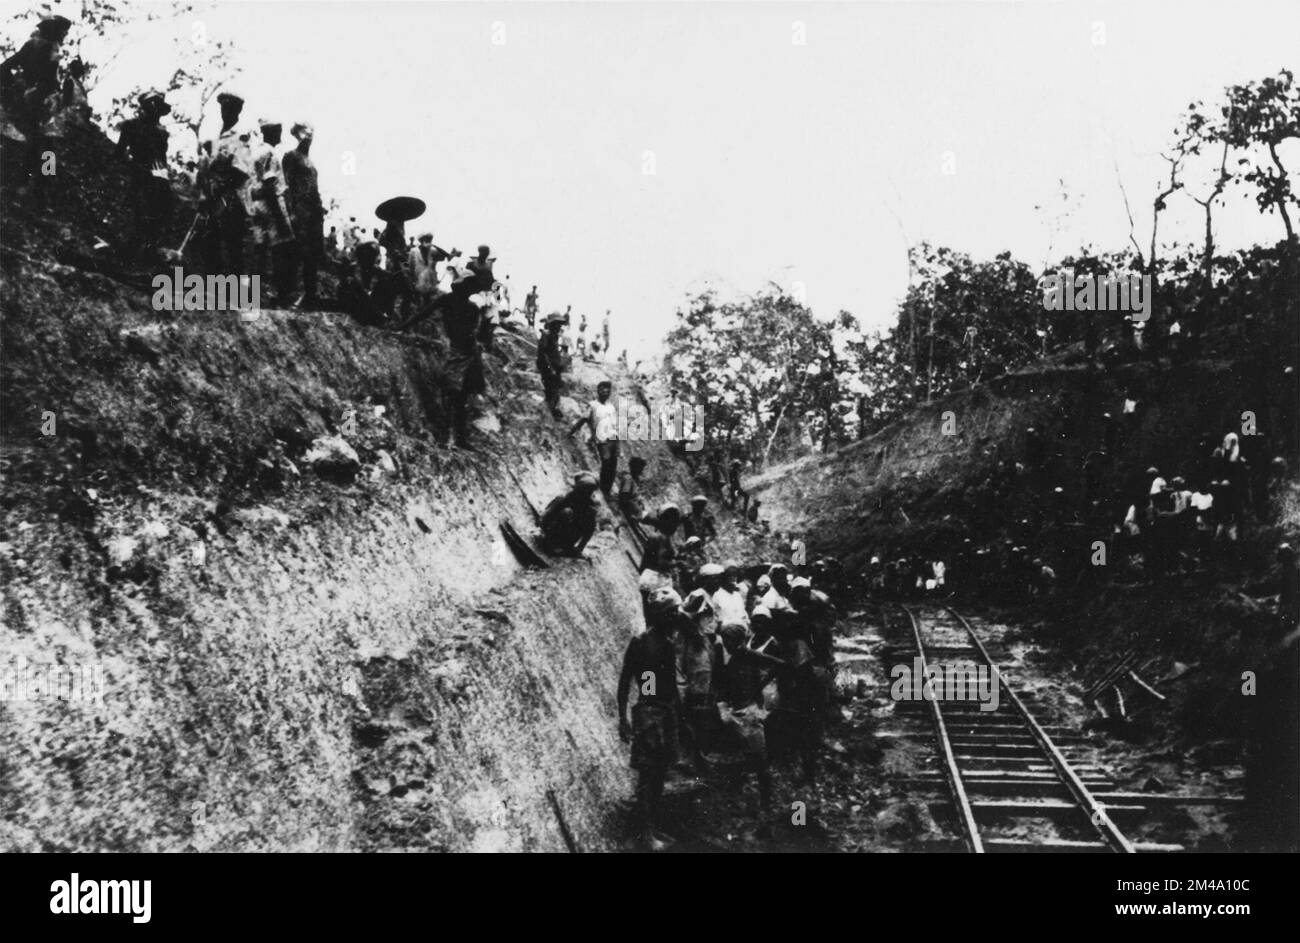 Burma / Myanmar: Tamils at work on the construction of the Burma Railway (Thai-Burma Railway) which ran 415 km (258 miles) between Ban Pong, Thailand and Thanbyuzayat, Burma. Photo from Leiden University Library (CC BY 4.0 License). Approximately 180,000 Asian civilian slave labourers and 60,000 Allied POWs were held at Thanbyuzayat by the Japanese and forced to build the Burma Railway (nicknamed by inmates the 'Death Railway') between Bangkok, Thailand, and Rangoon (Yangon), Burma. Of these, around 90,000 Asian civilian laborers and 12,399 Allied POWs died as a result of starvation, exhaust Stock Photo